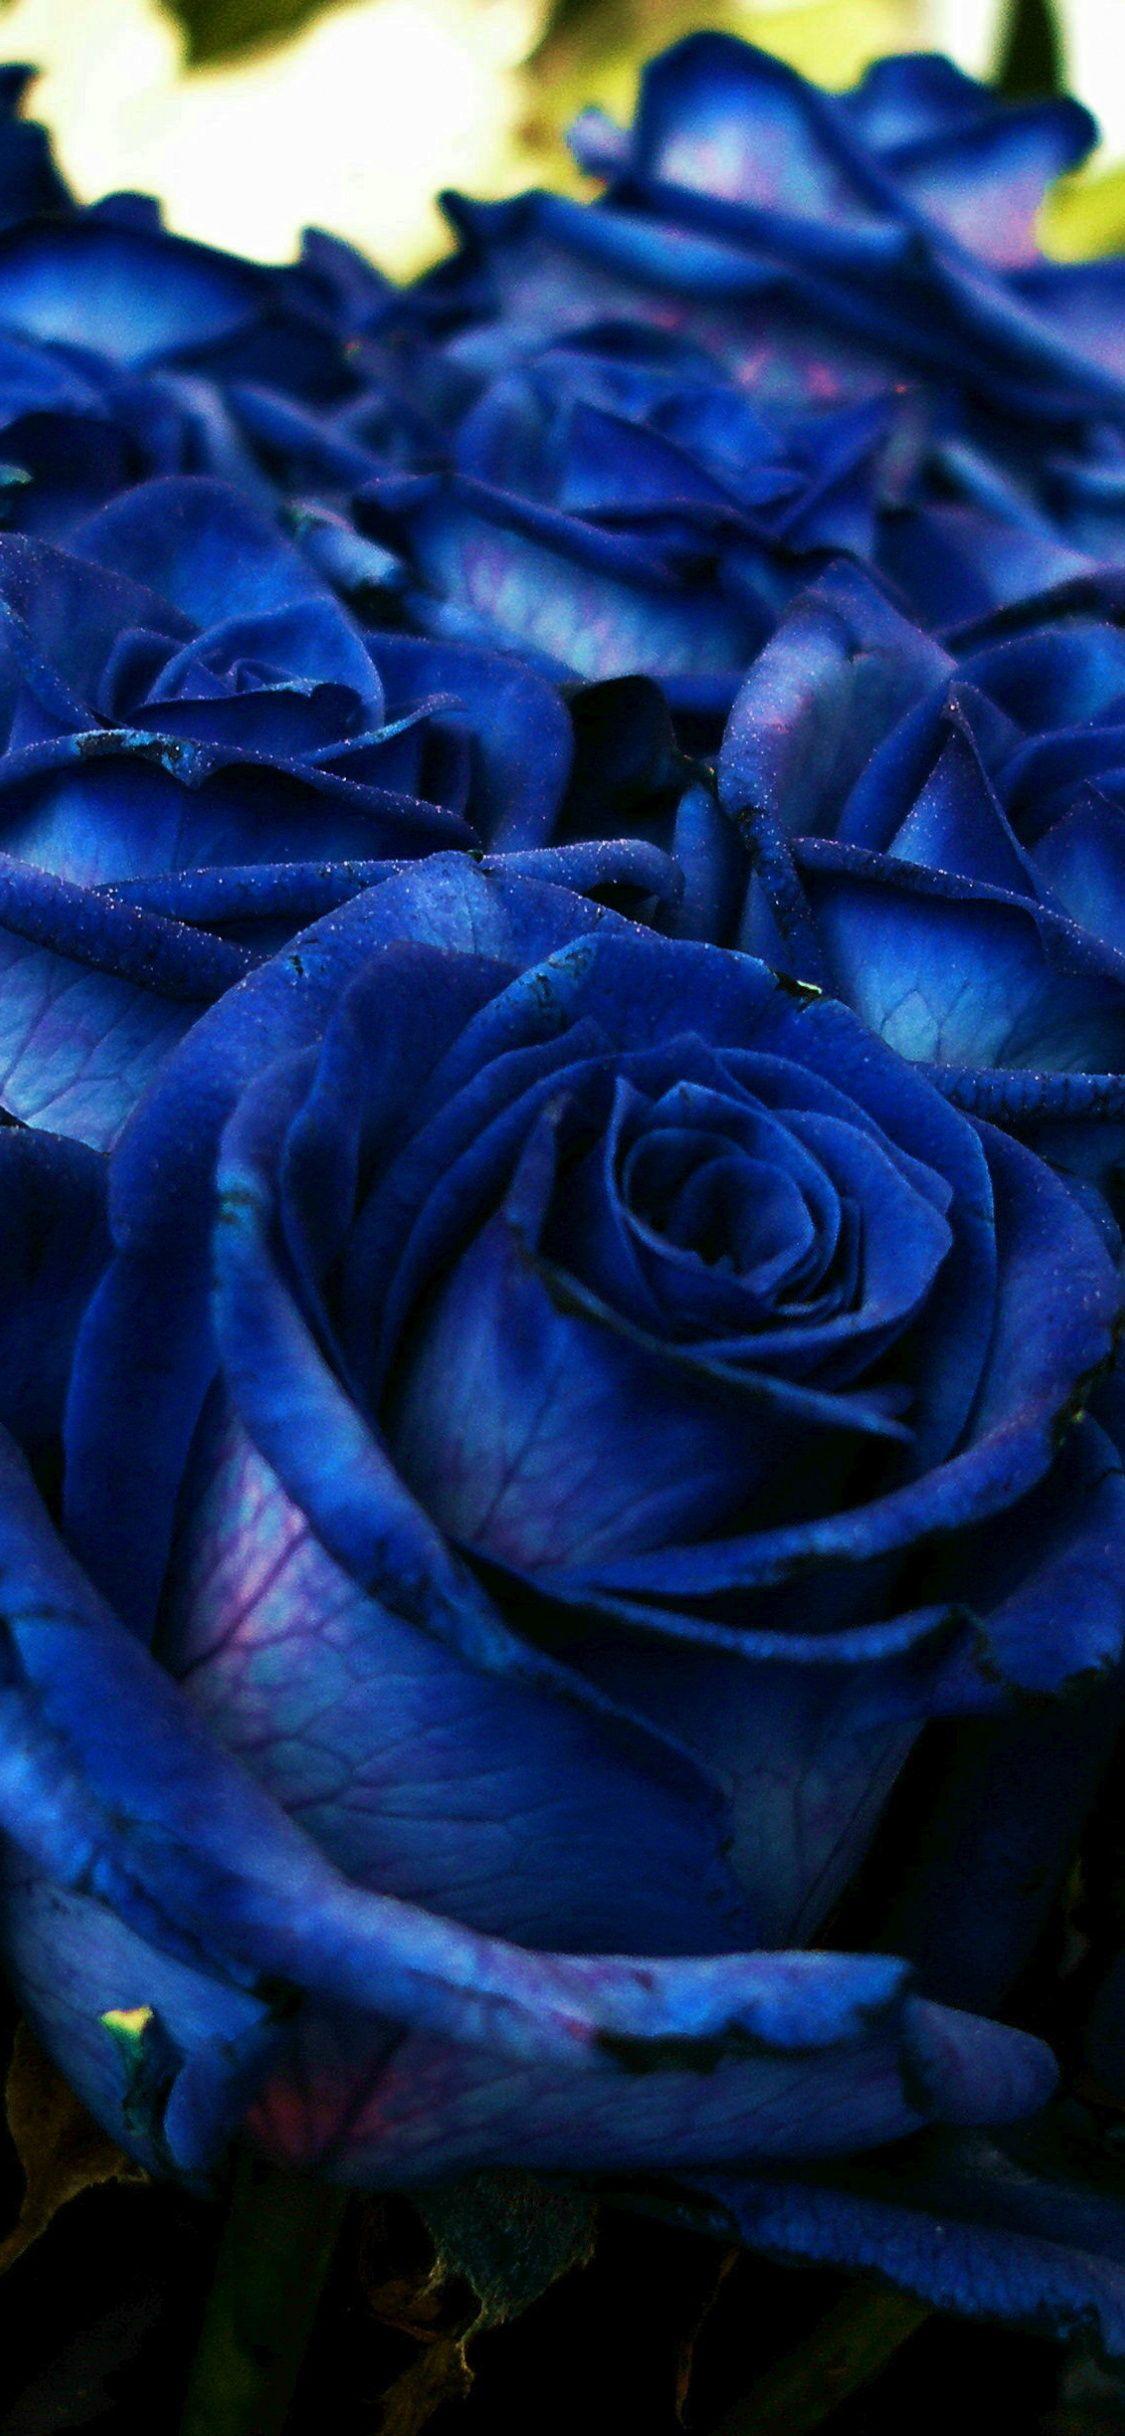 Blue Roses iPhone Wallpapers - Top Free Blue Roses iPhone Backgrounds